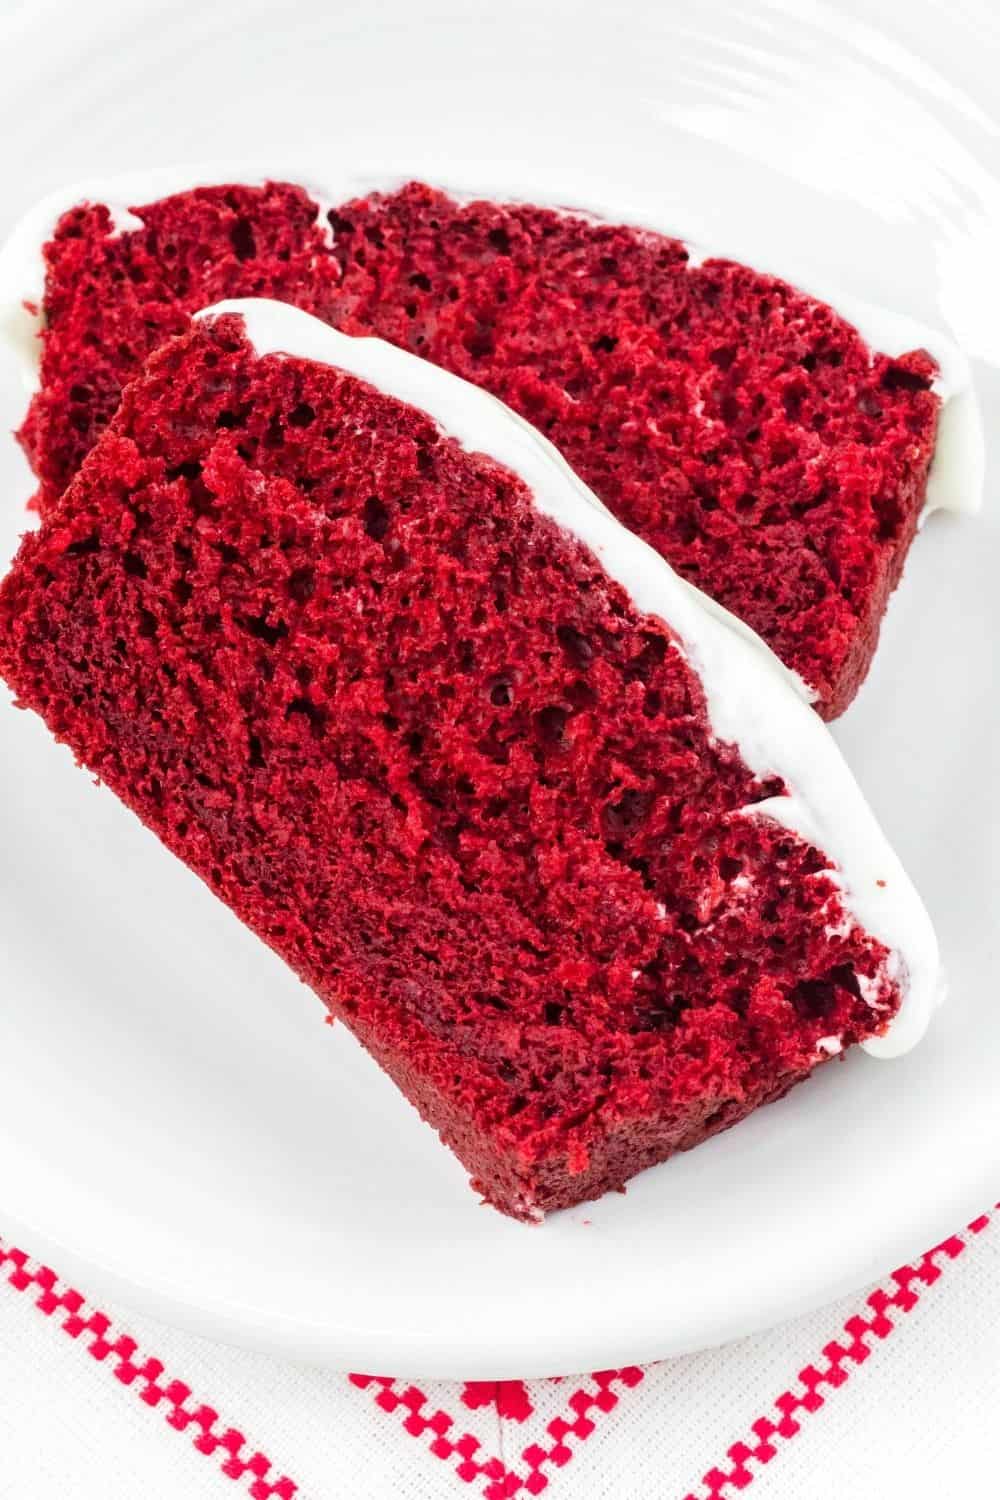 two slices of red velvet loaf cake on a white plate